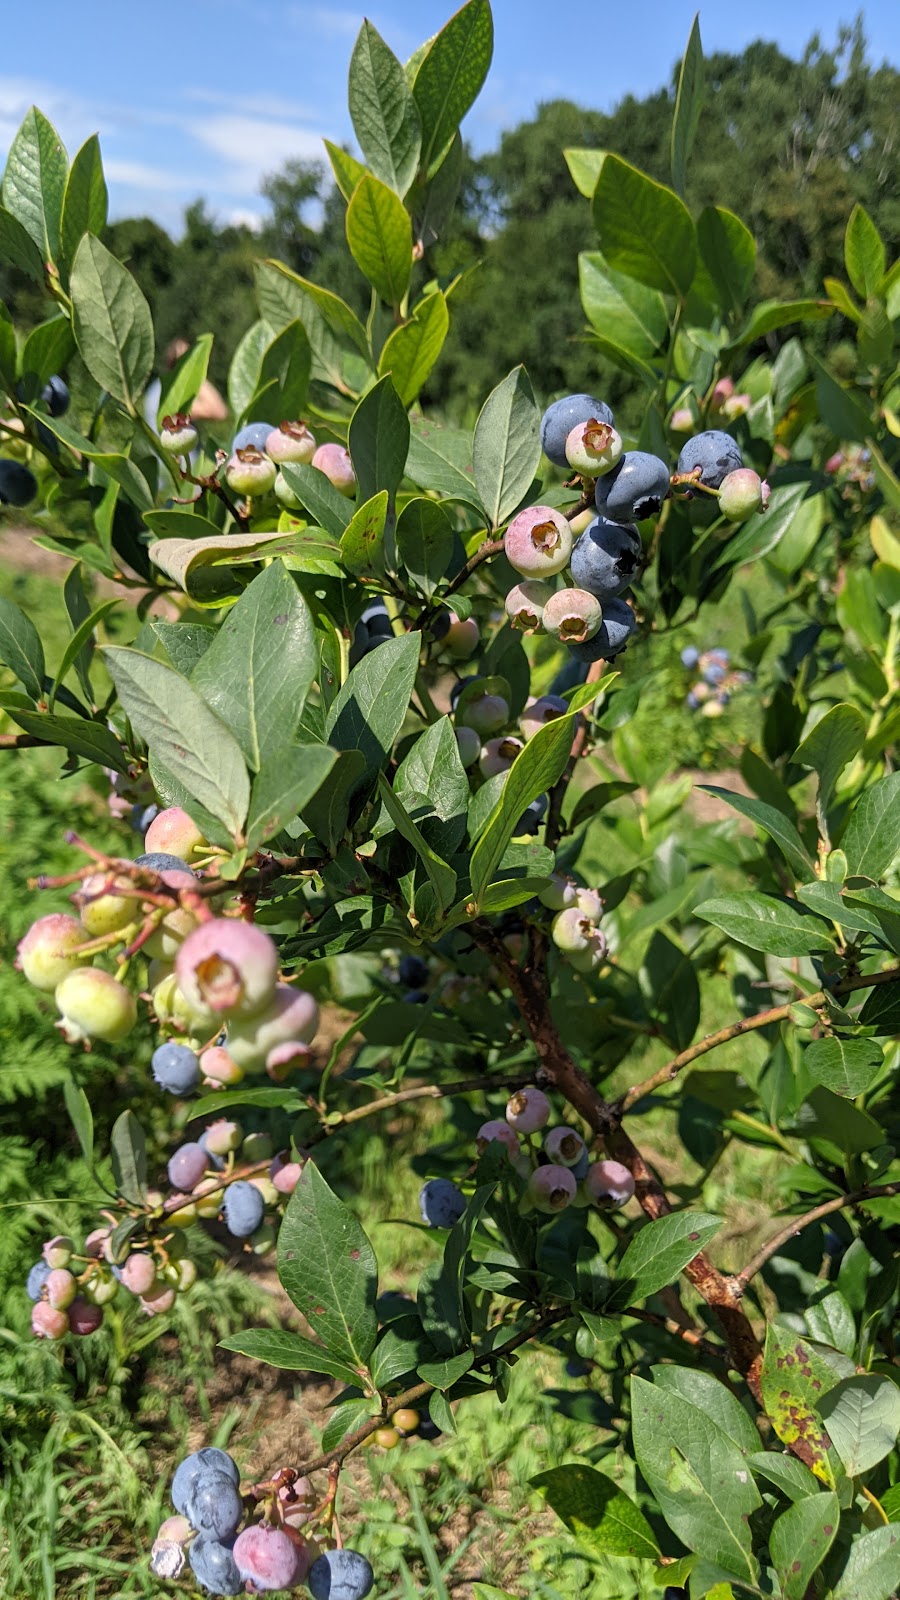 Kelso Homestead Blueberries | 207 Bromley Rd, Chester, MA 01011 | Phone: (413) 667-3251